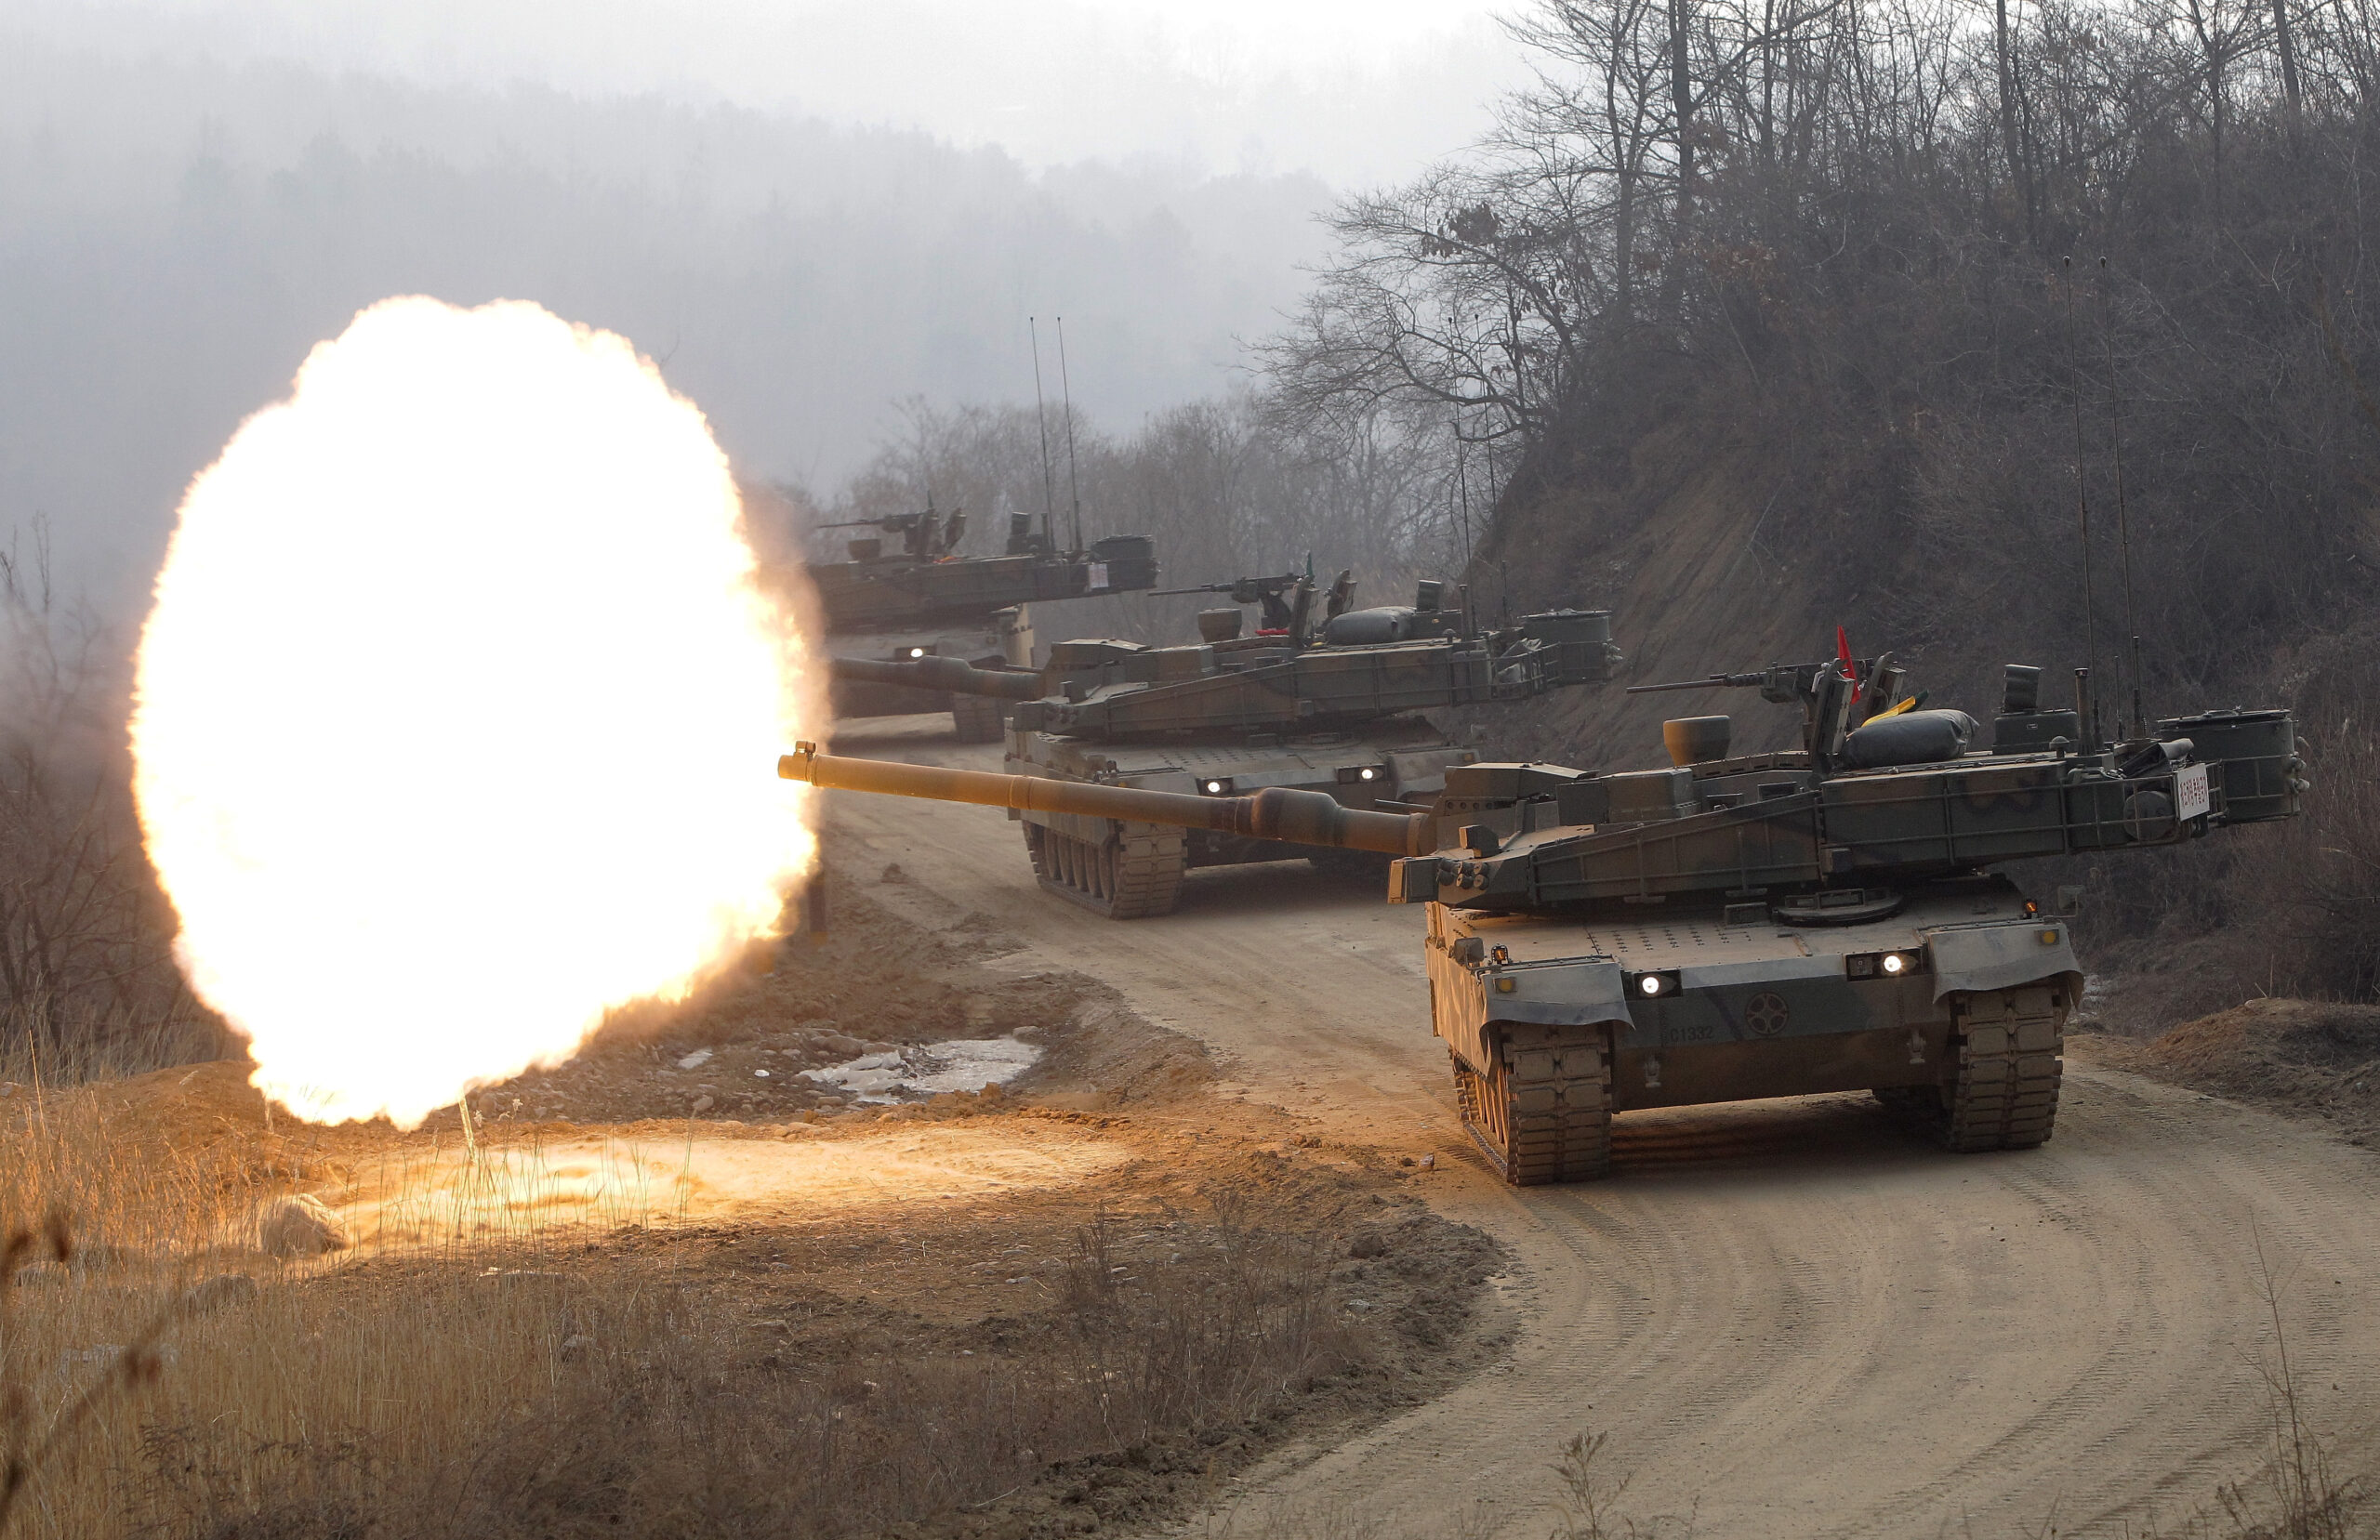 Meeting with Korean Representatives: Chance for the K2 Tank in Slovakia?